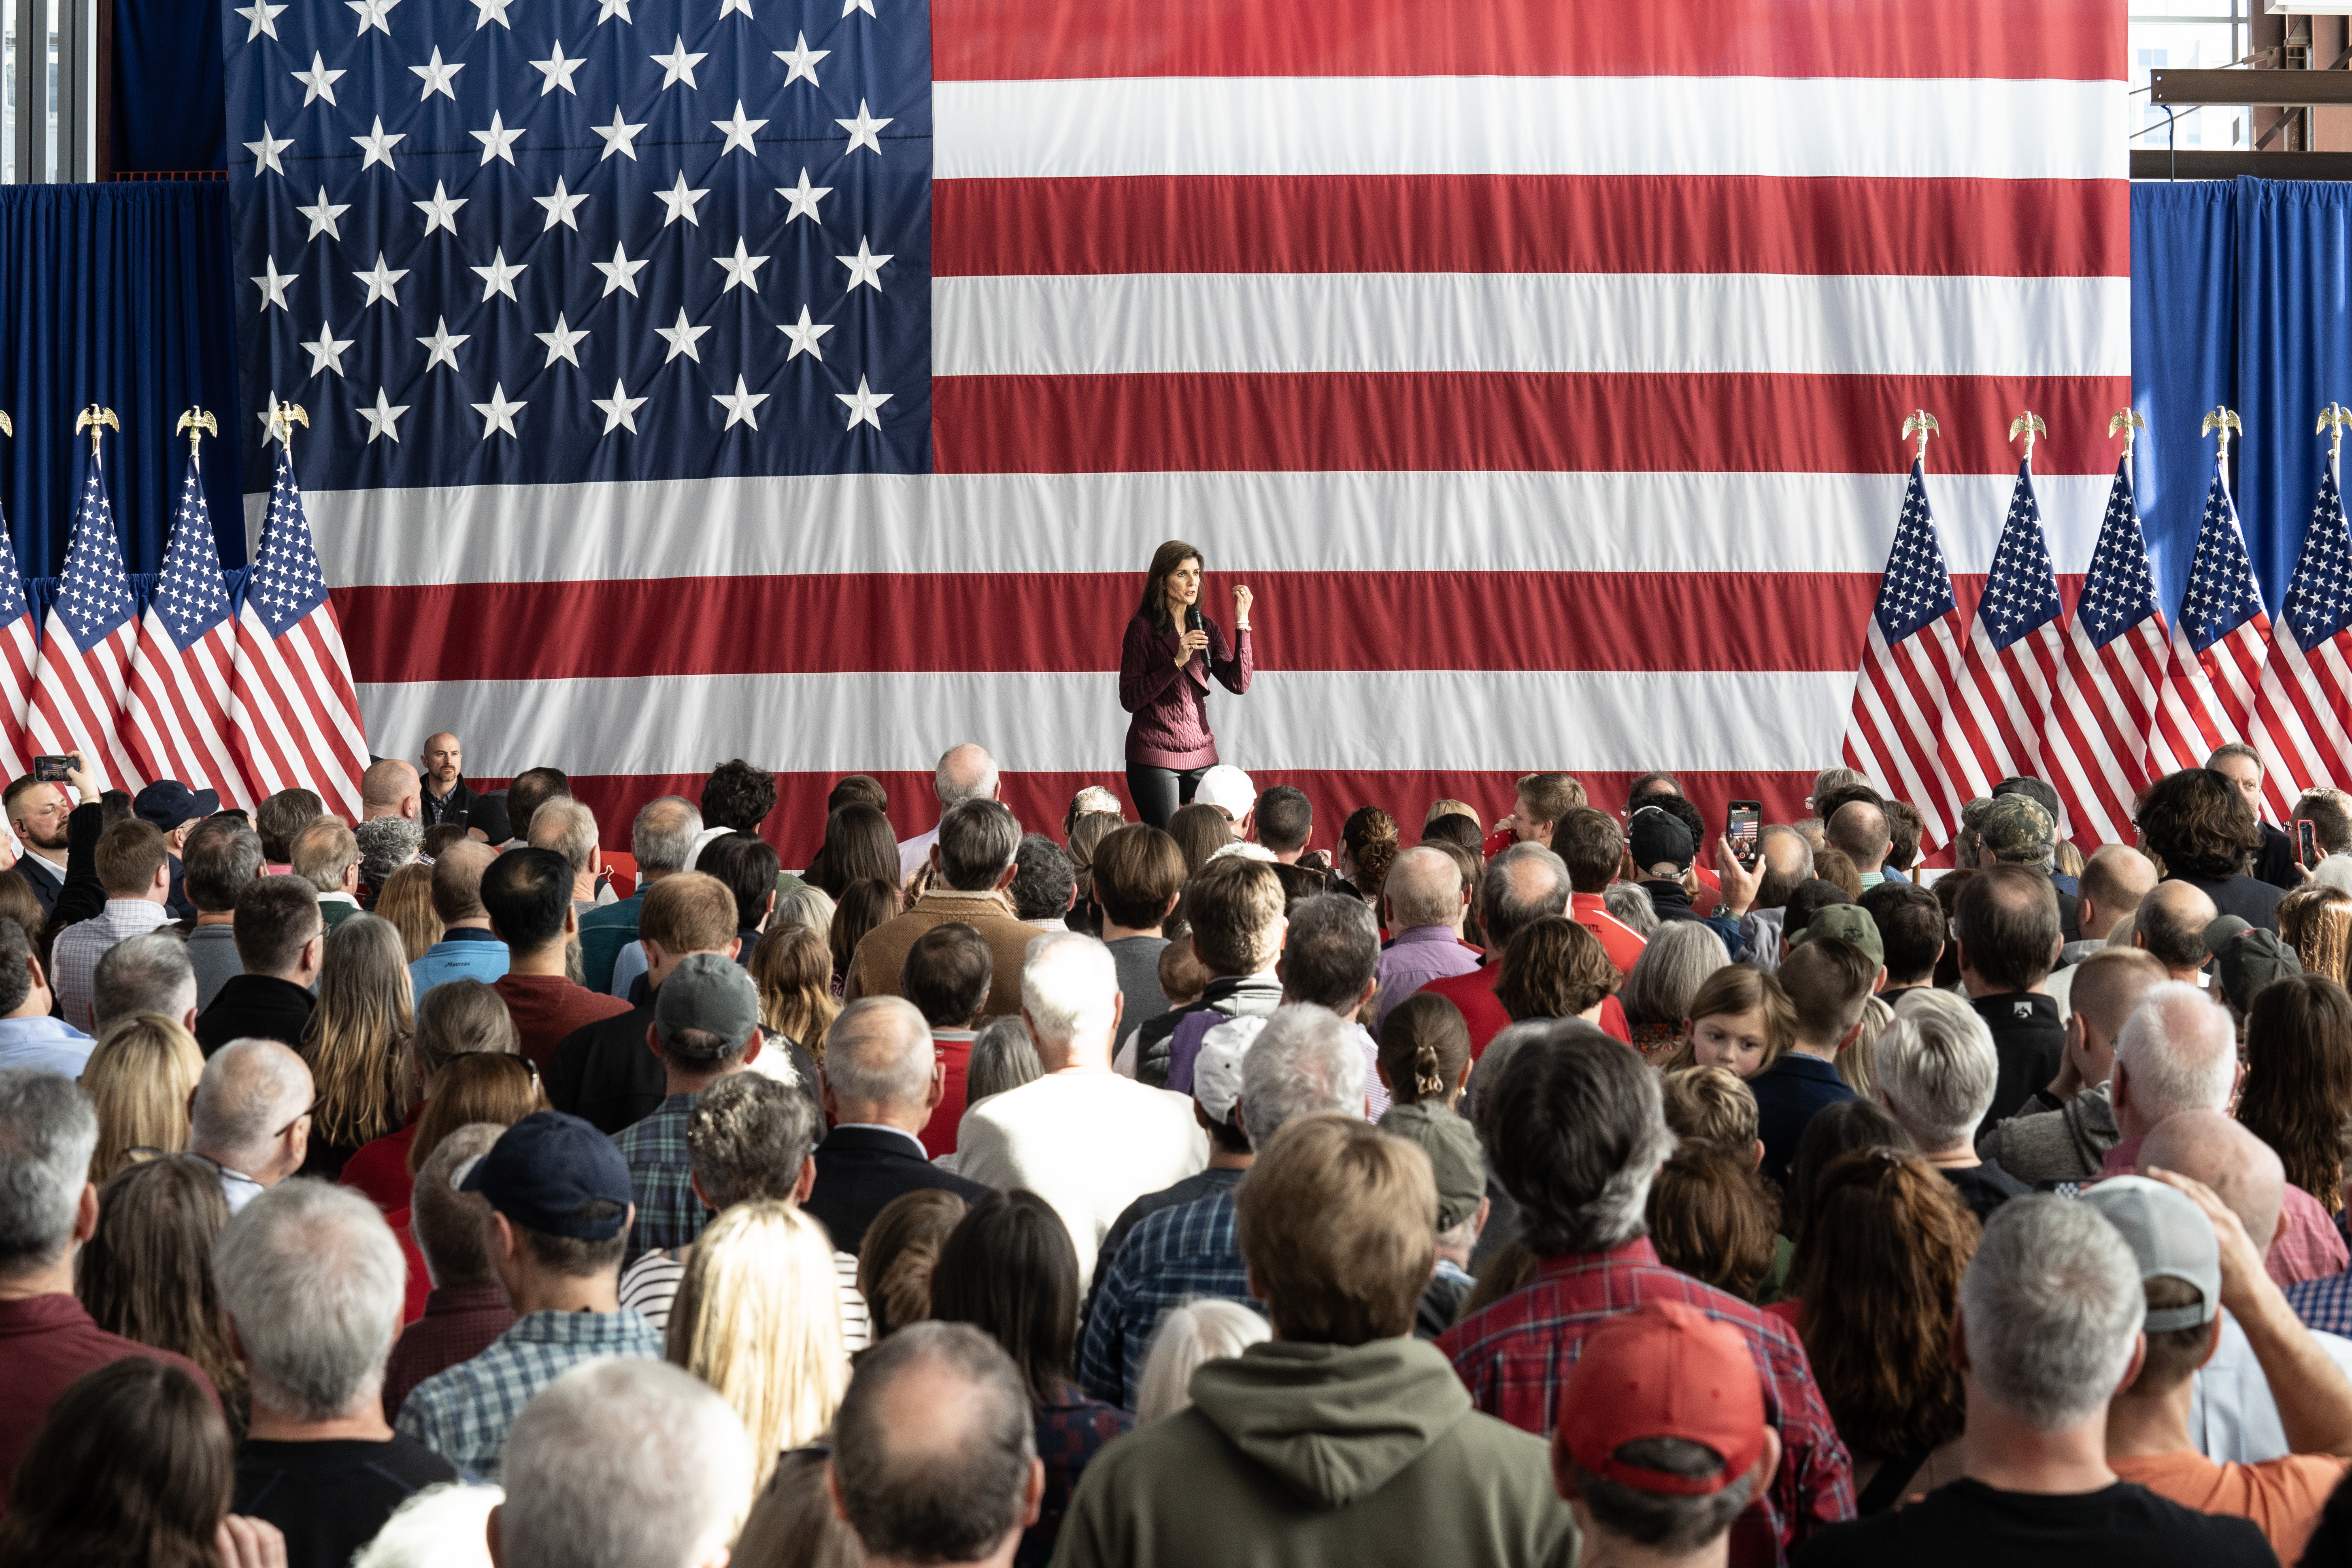 Former South Carolina Gov. Nikki Haley speaks during a campaign rally in Raleigh, North Carolina, on March 2.